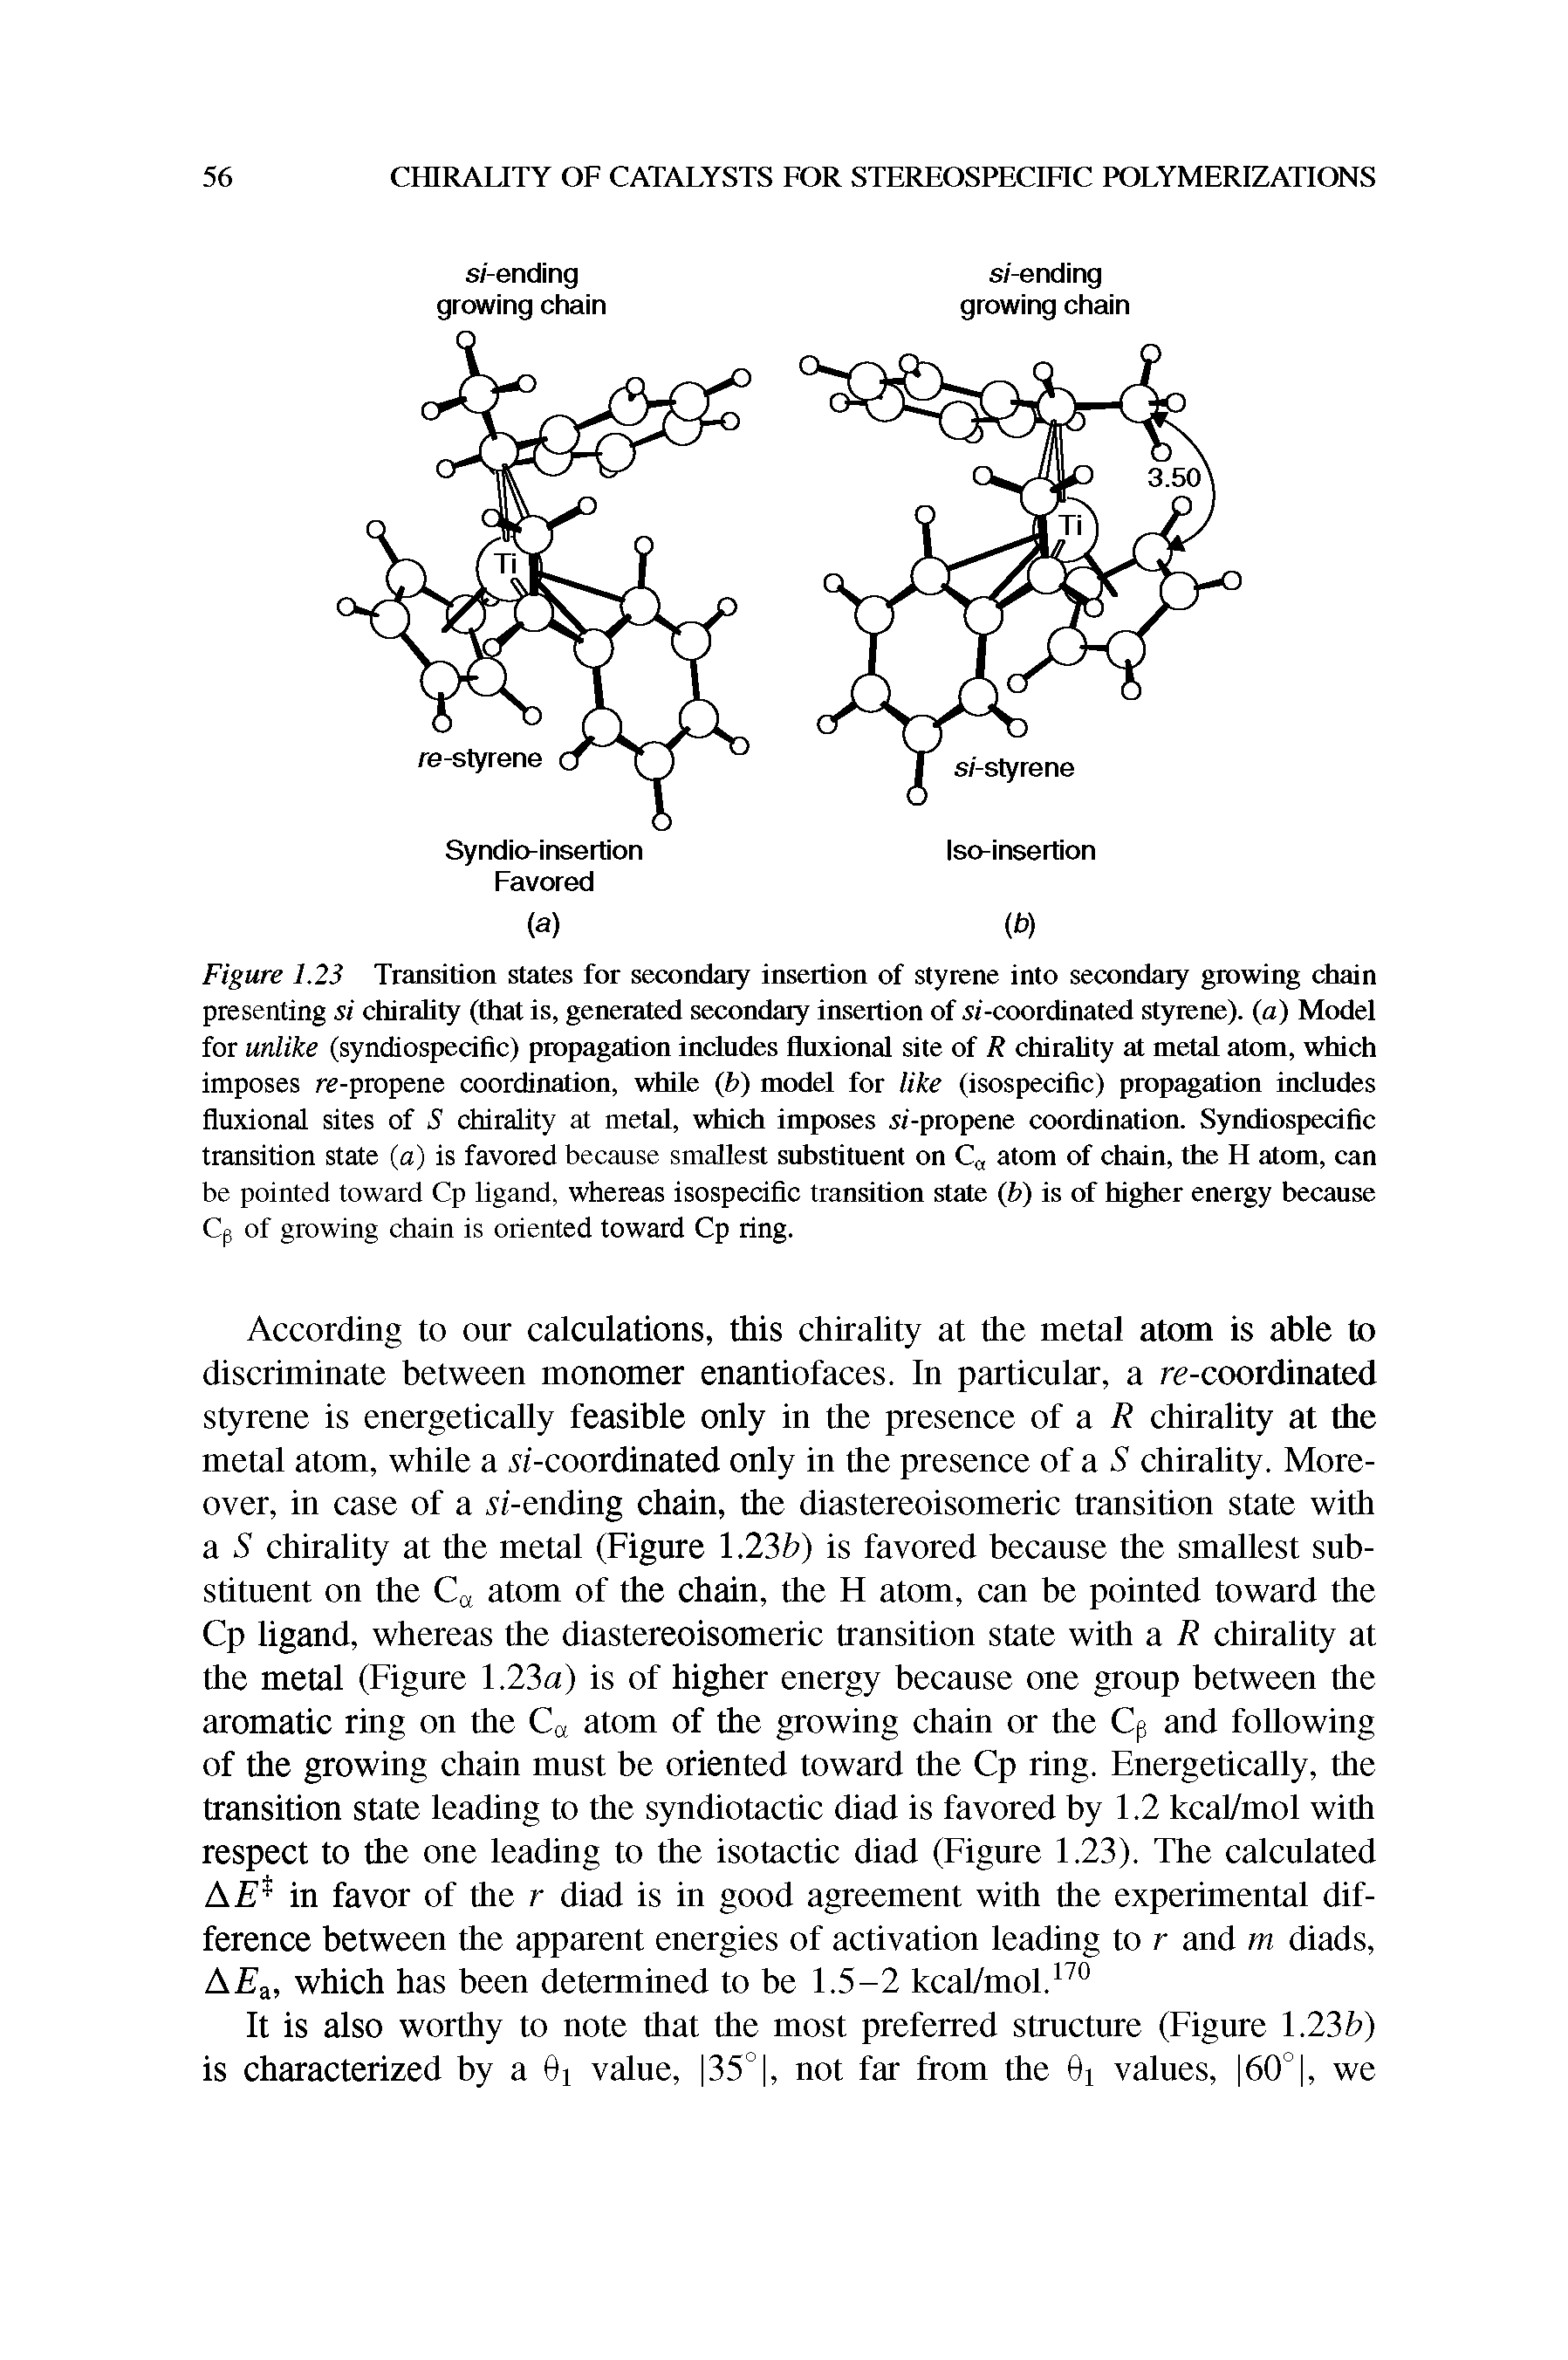 Figure 1.23 Transition states for secondary insertion of styrene into secondary growing chain presenting si chirality (that is, generated secondary insertion of. si-coordinated styrene), (a) Model for unlike (syndiospecific) propagation includes fluxional site of R chirality at metal atom, which imposes re-propene coordination, while (b) model for like (isospecific) propagation includes fluxional sites of S chirality at metal, which imposes. si-propene coordination. Syndiospecific transition state (a) is favored because smallest substituent on C atom of chain, the H atom, can be pointed toward Cp ligand, whereas isospecific transition state (b) is of higher energy because Cp of growing chain is oriented toward Cp ring.